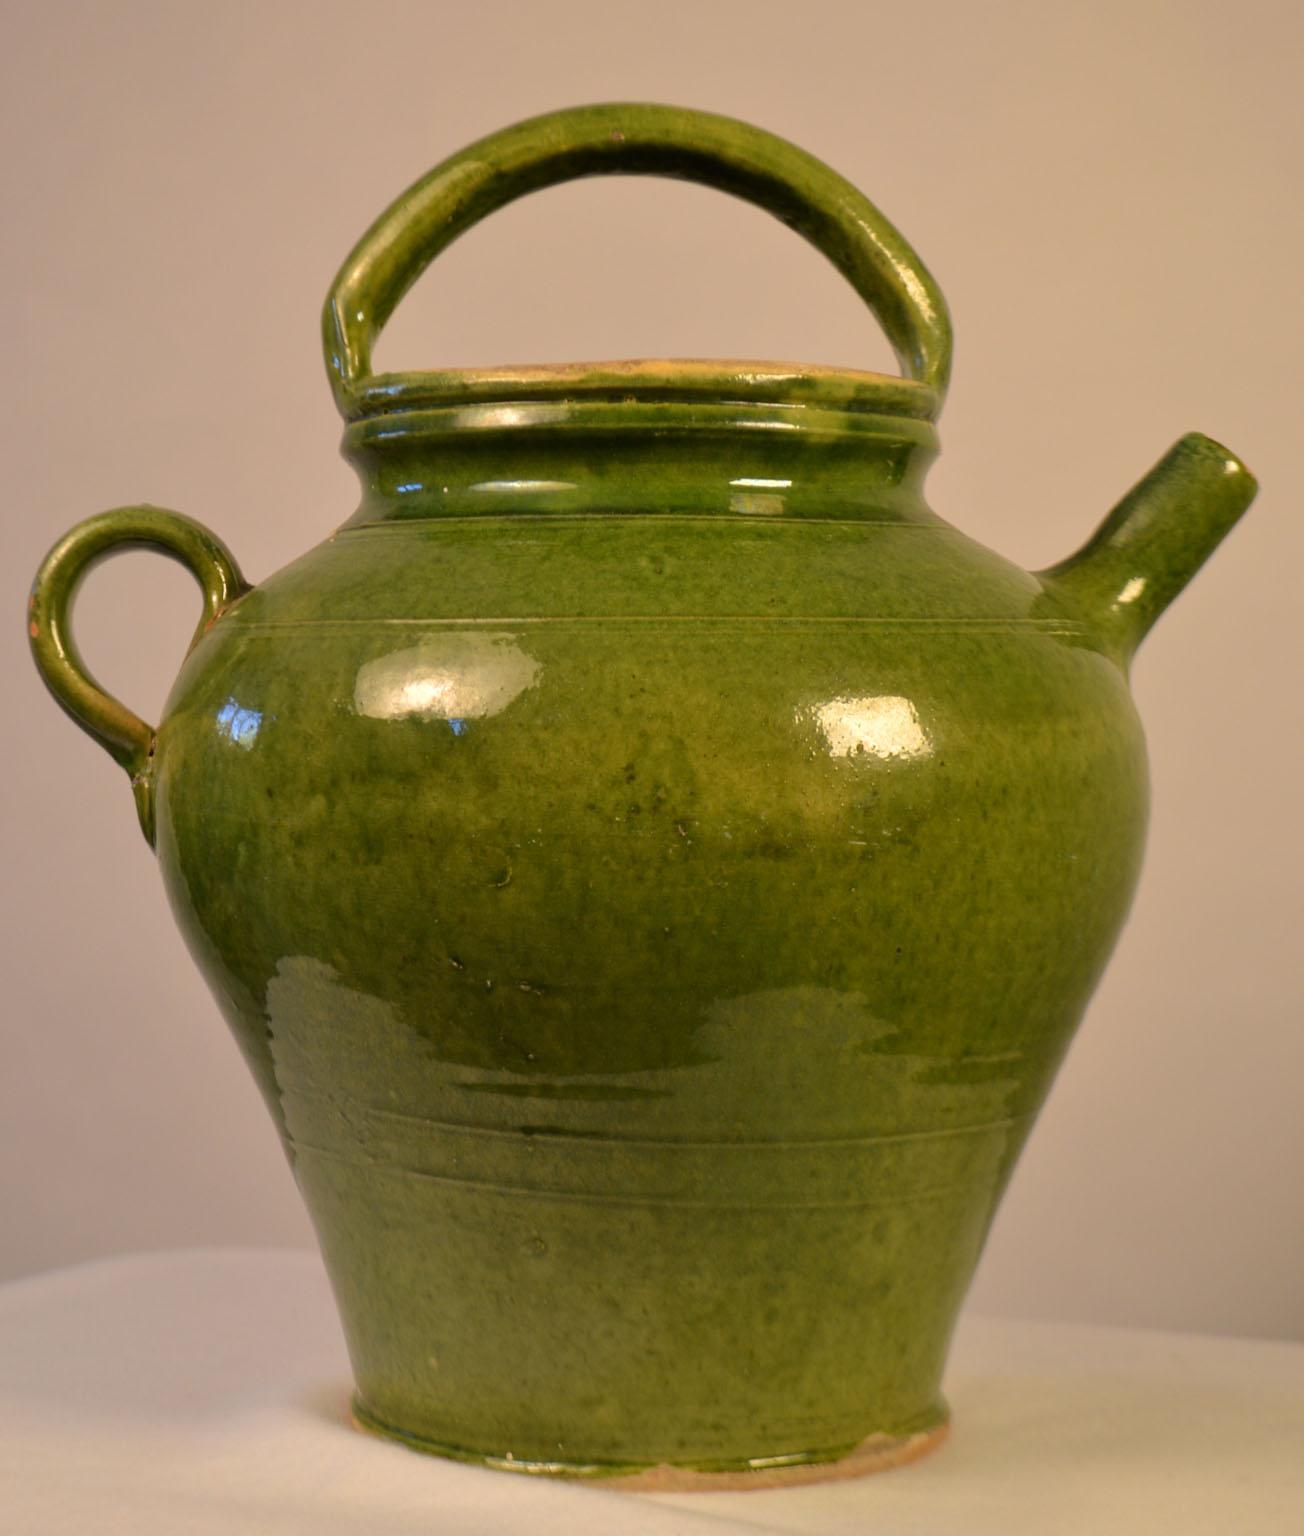 Turn of the century (circa 1900) terracotta water jug with a nice deep green glaze. Minor glaze scale and skips.Once a common piece of pottery used daily in French kitchens, these earthenware jugs have become showcase pieces sought by designers and